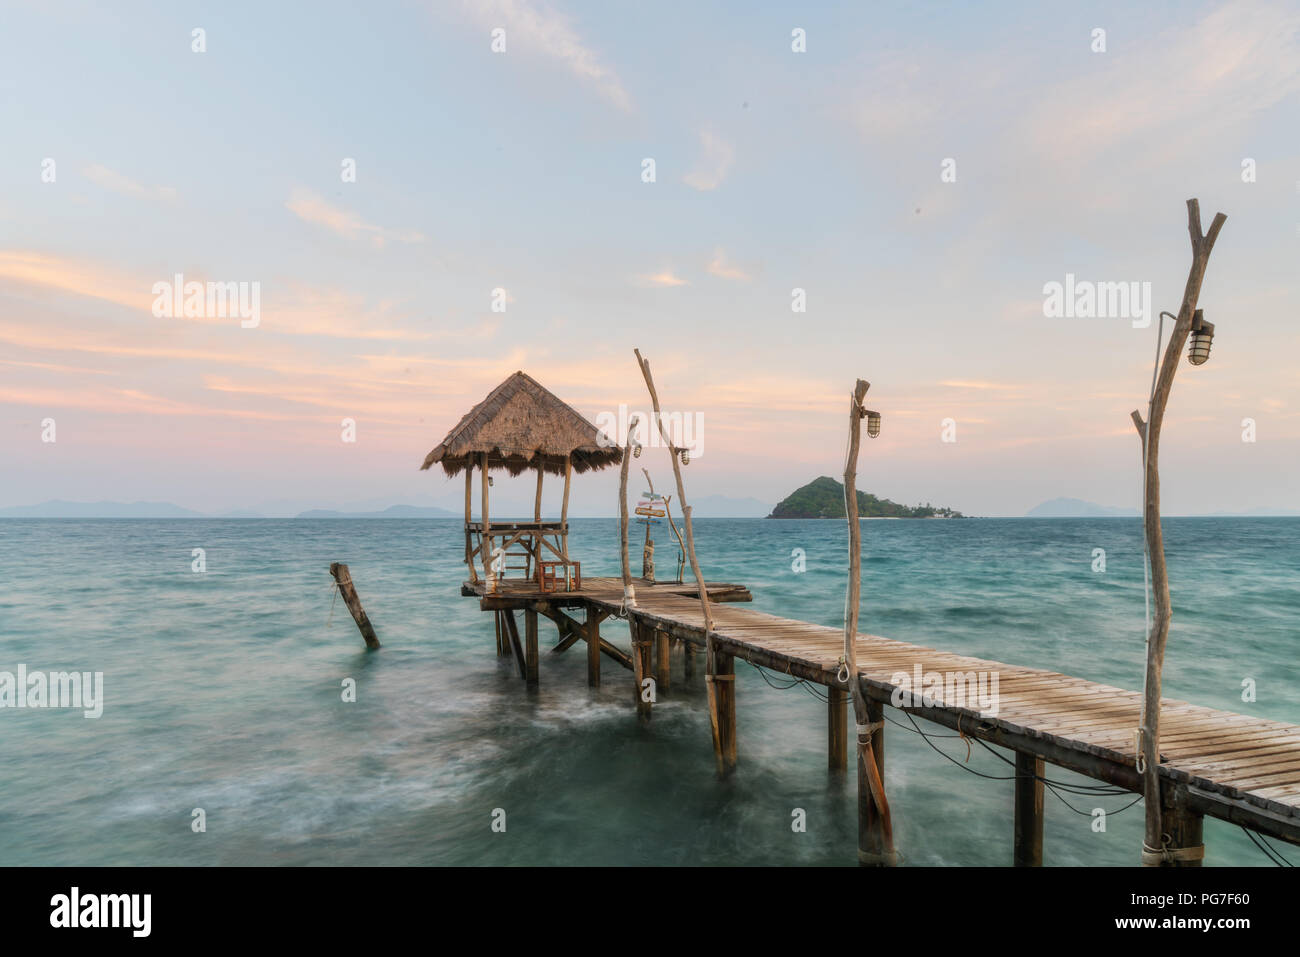 Wooden pier and hut in Phuket, Thailand. Summer, Travel, Vacation and Holiday concept. Stock Photo